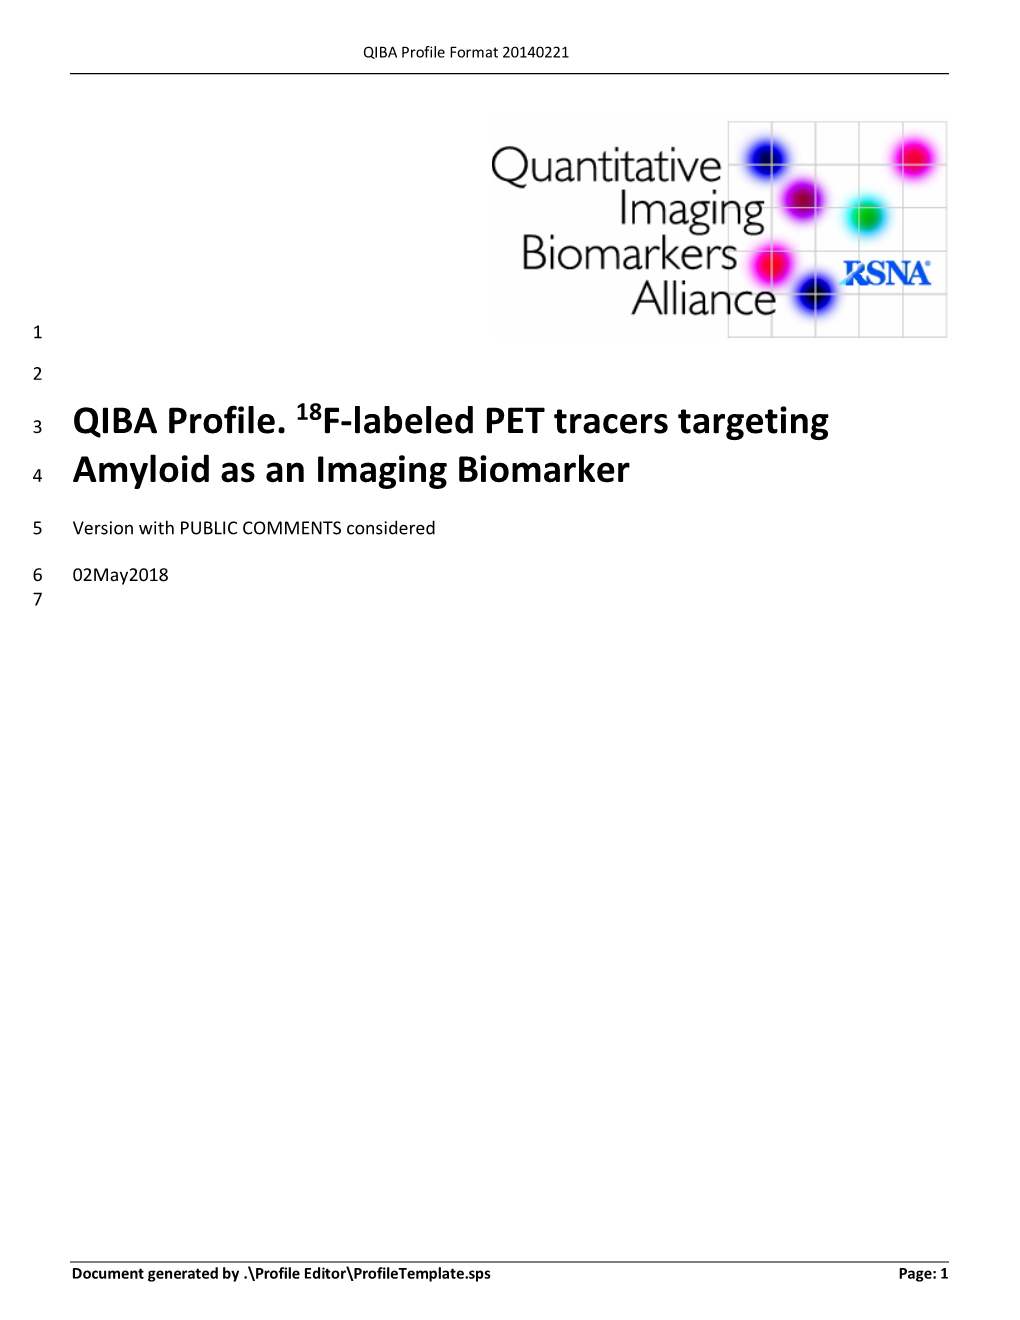 QIBA Profile. 18F-Labeled PET Tracers Targeting Amyloid As an Imaging Biomarker